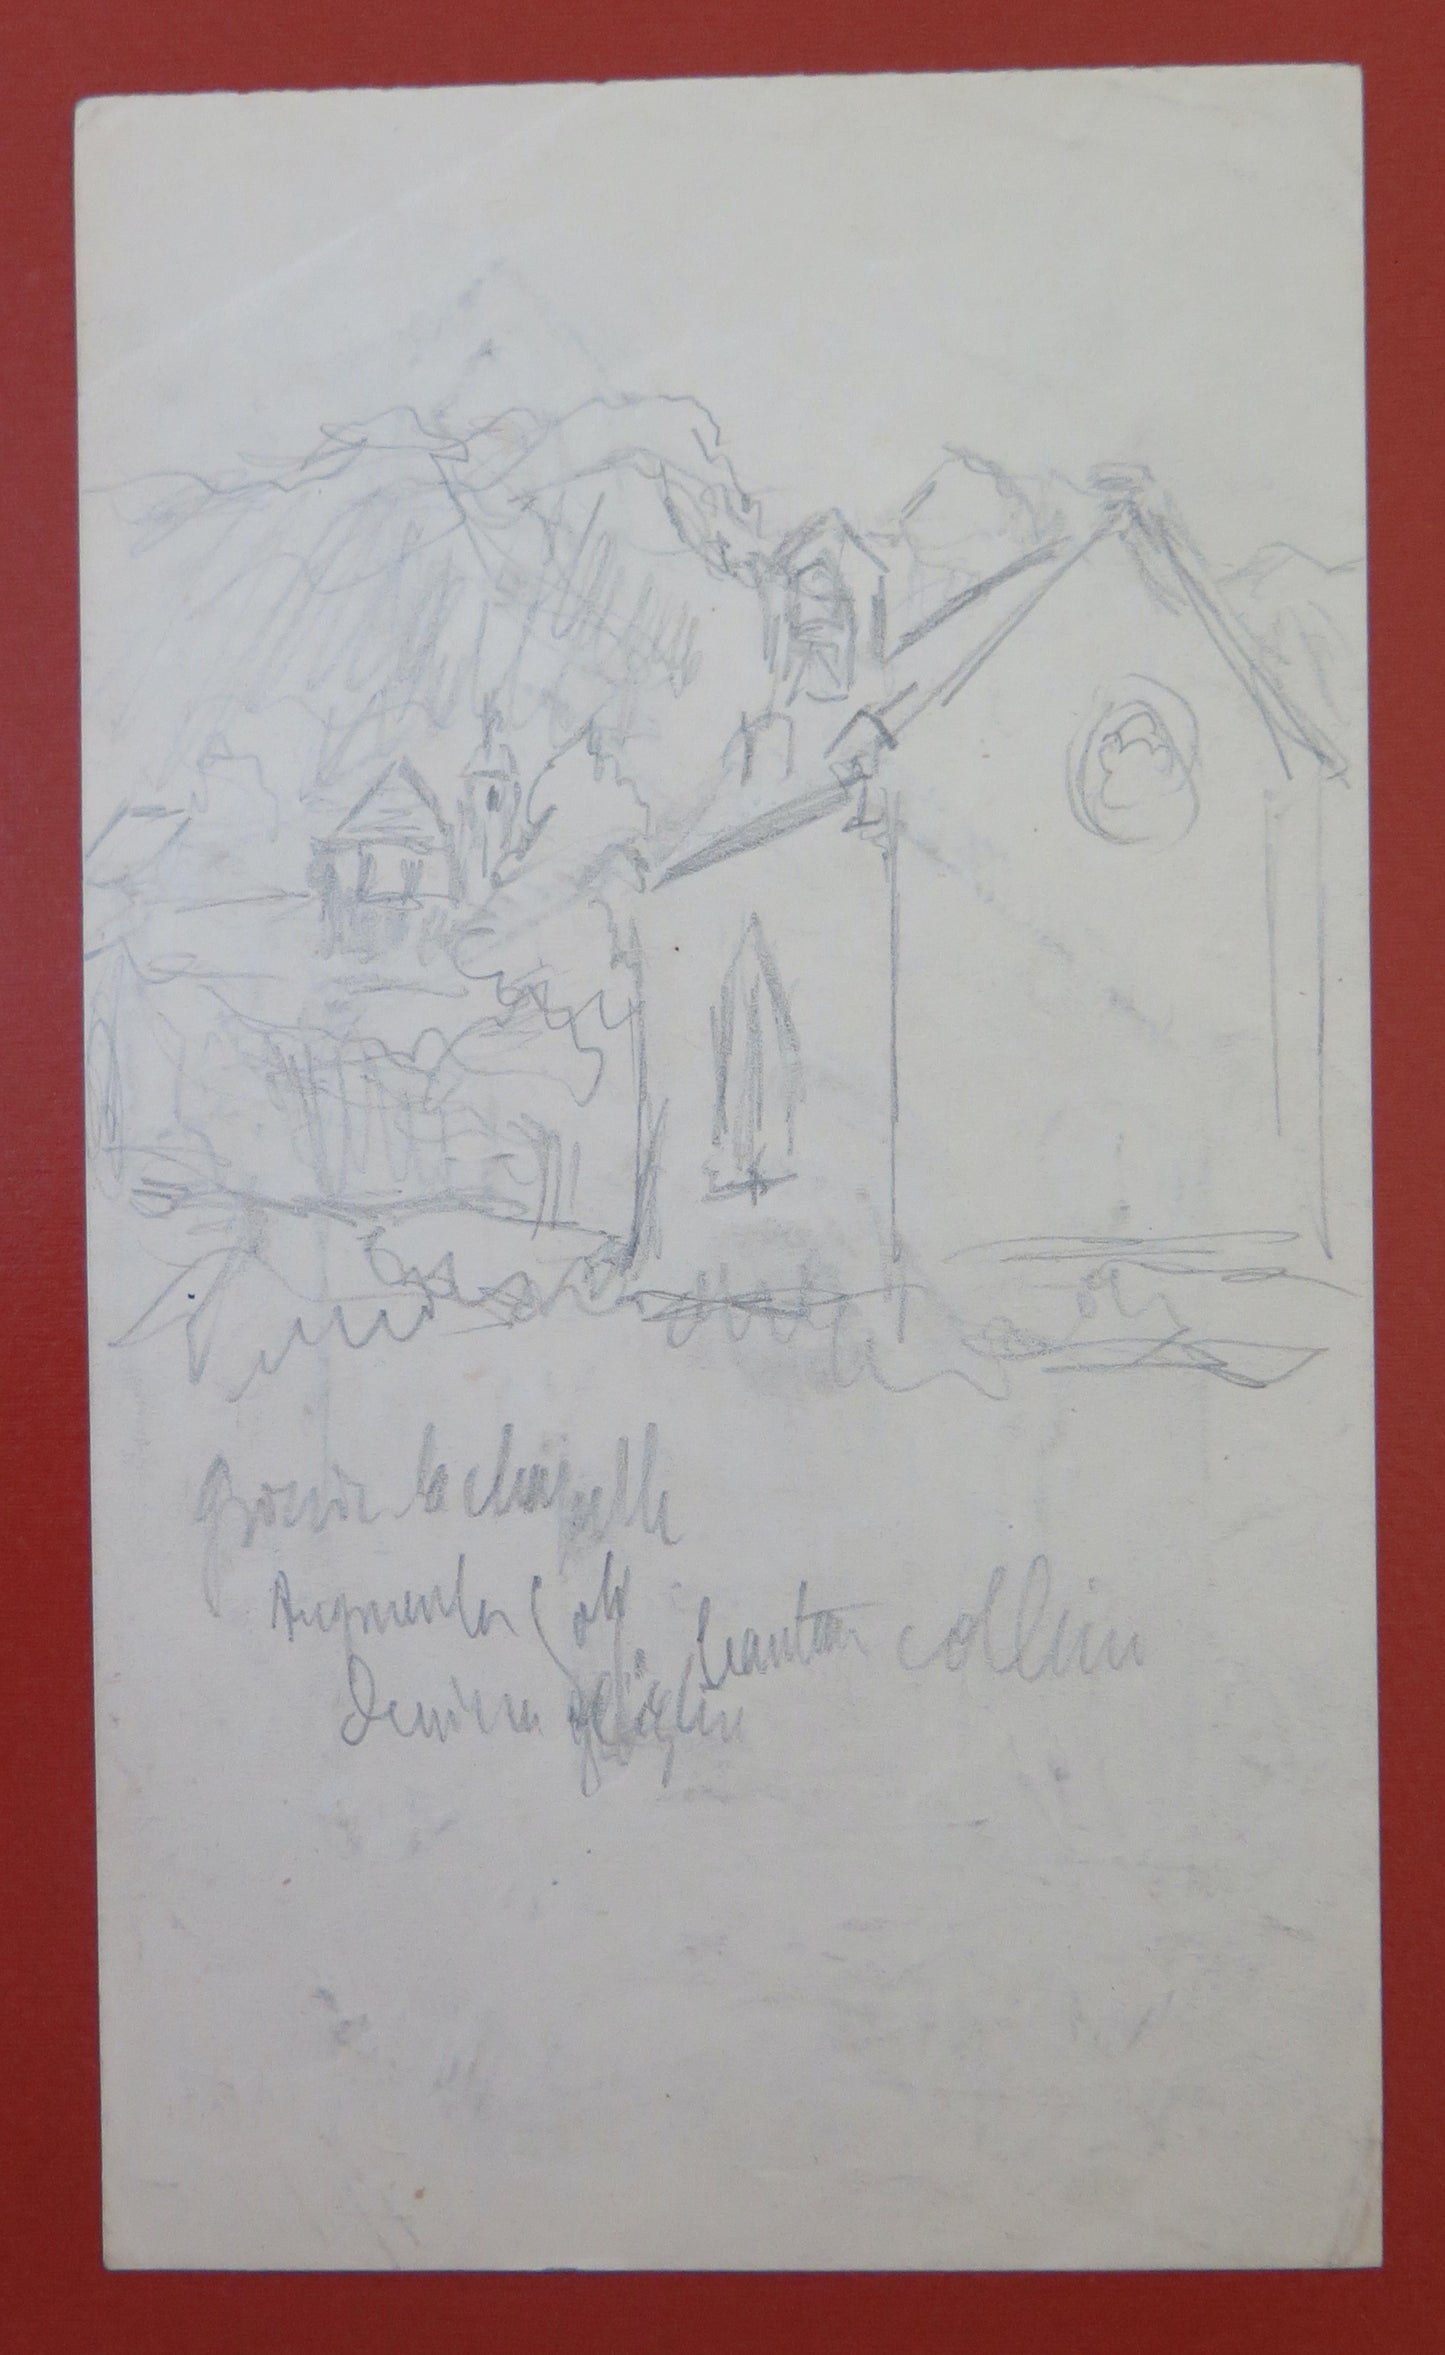 VIEW OF A COUNTRY CHURCH ANTIQUE DRAWING PEN PENCIL ON PAPER BM53.5E